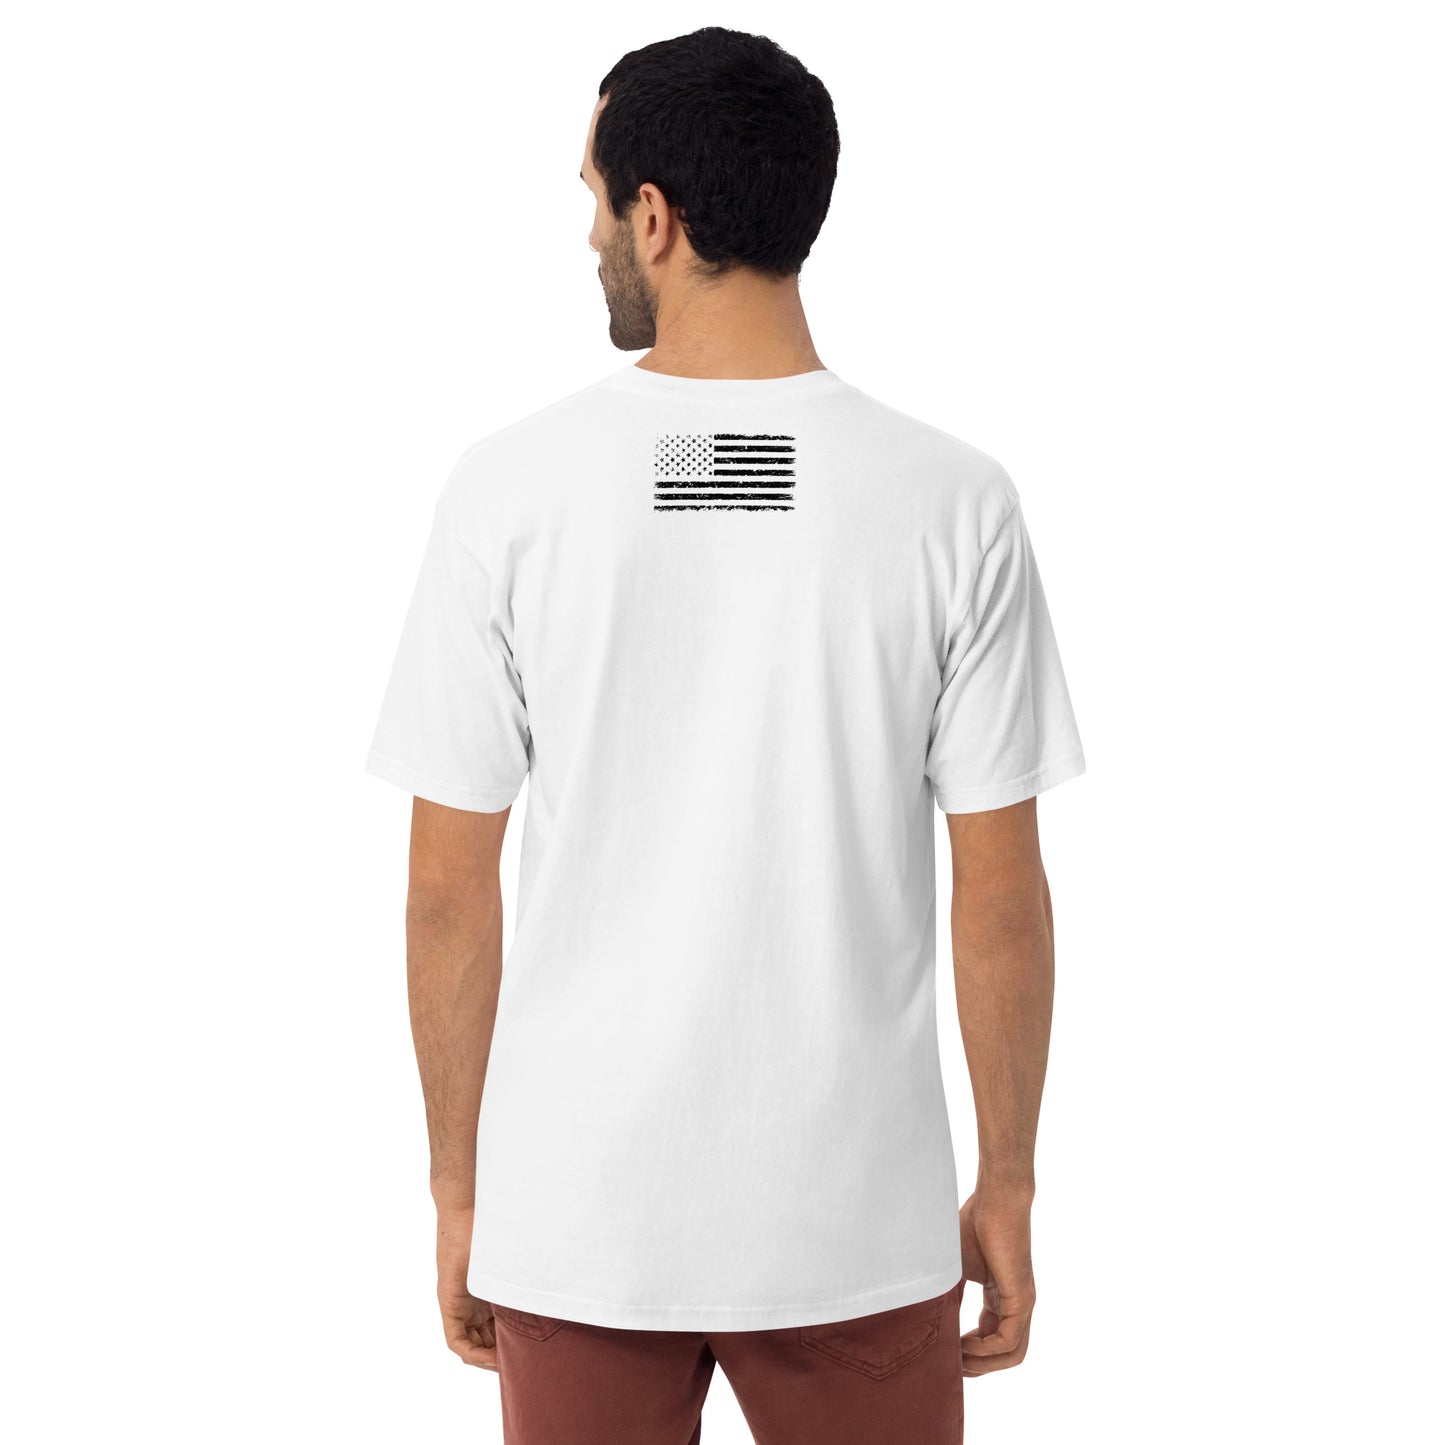 We The People White tee